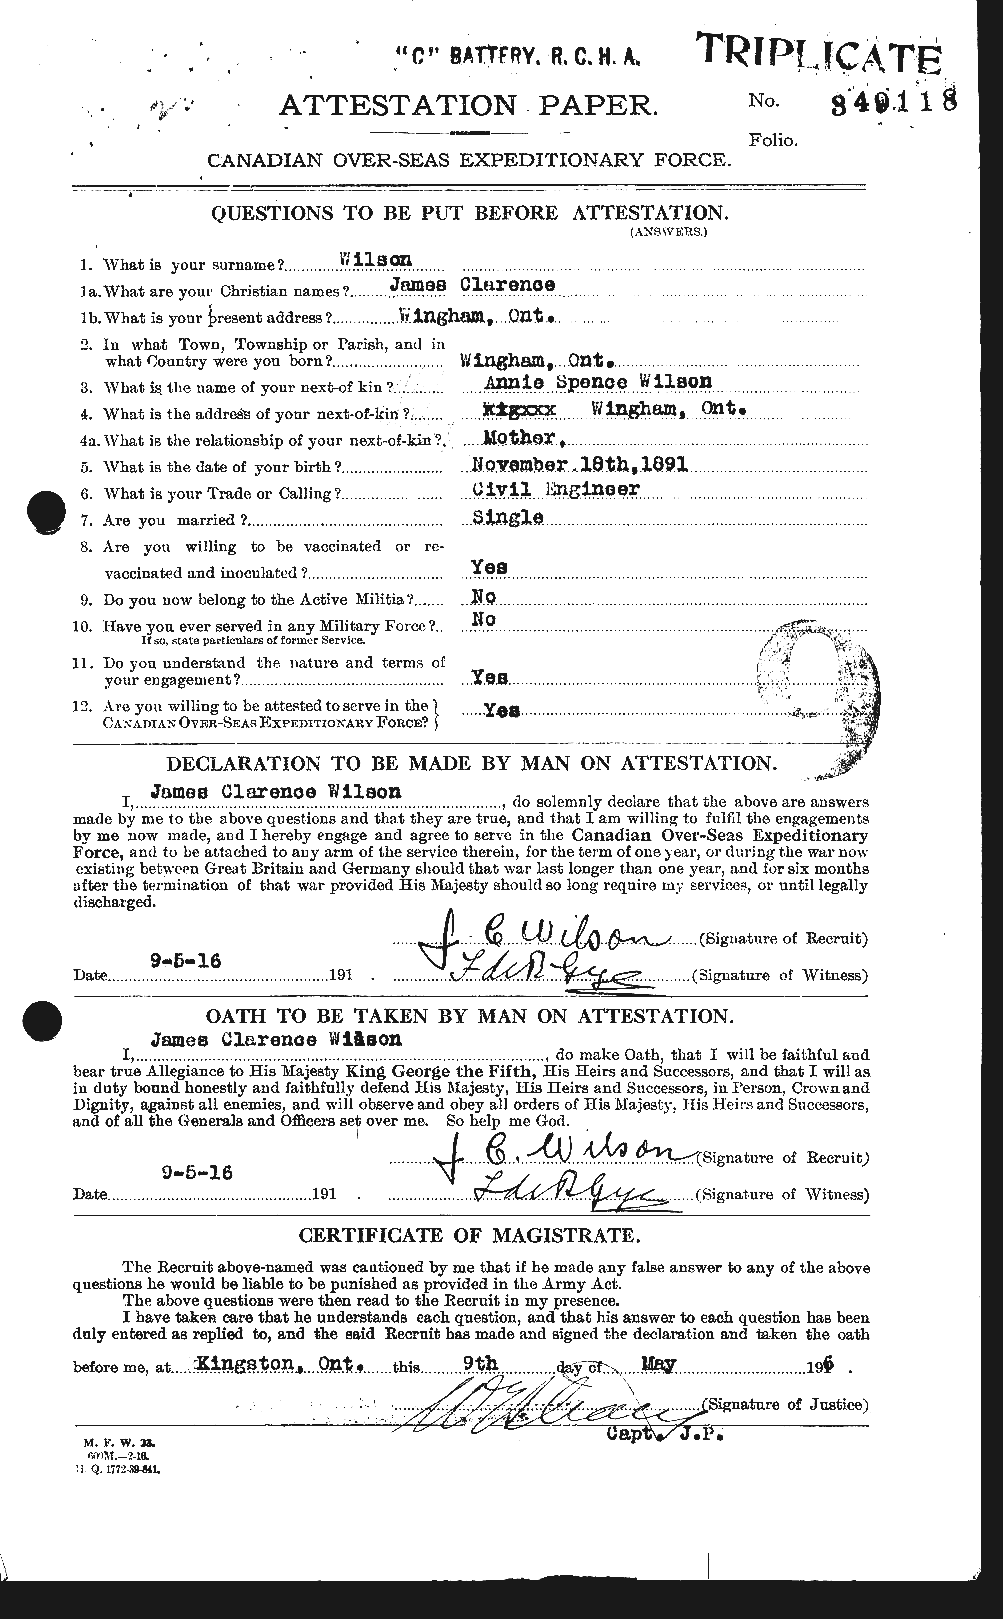 Personnel Records of the First World War - CEF 681430a